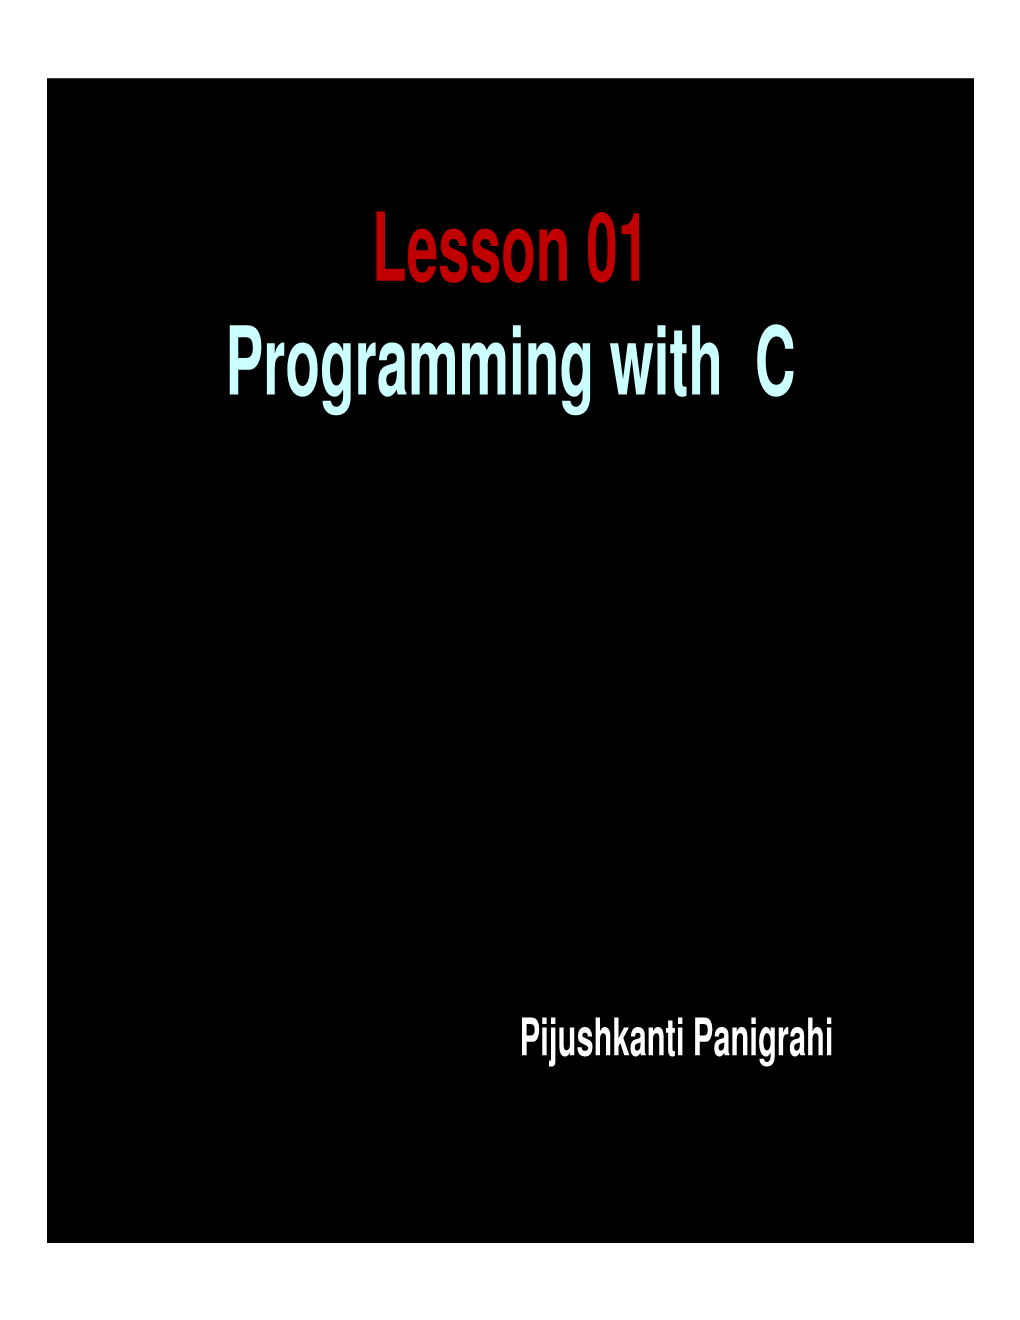 Lesson 01 Programming with C